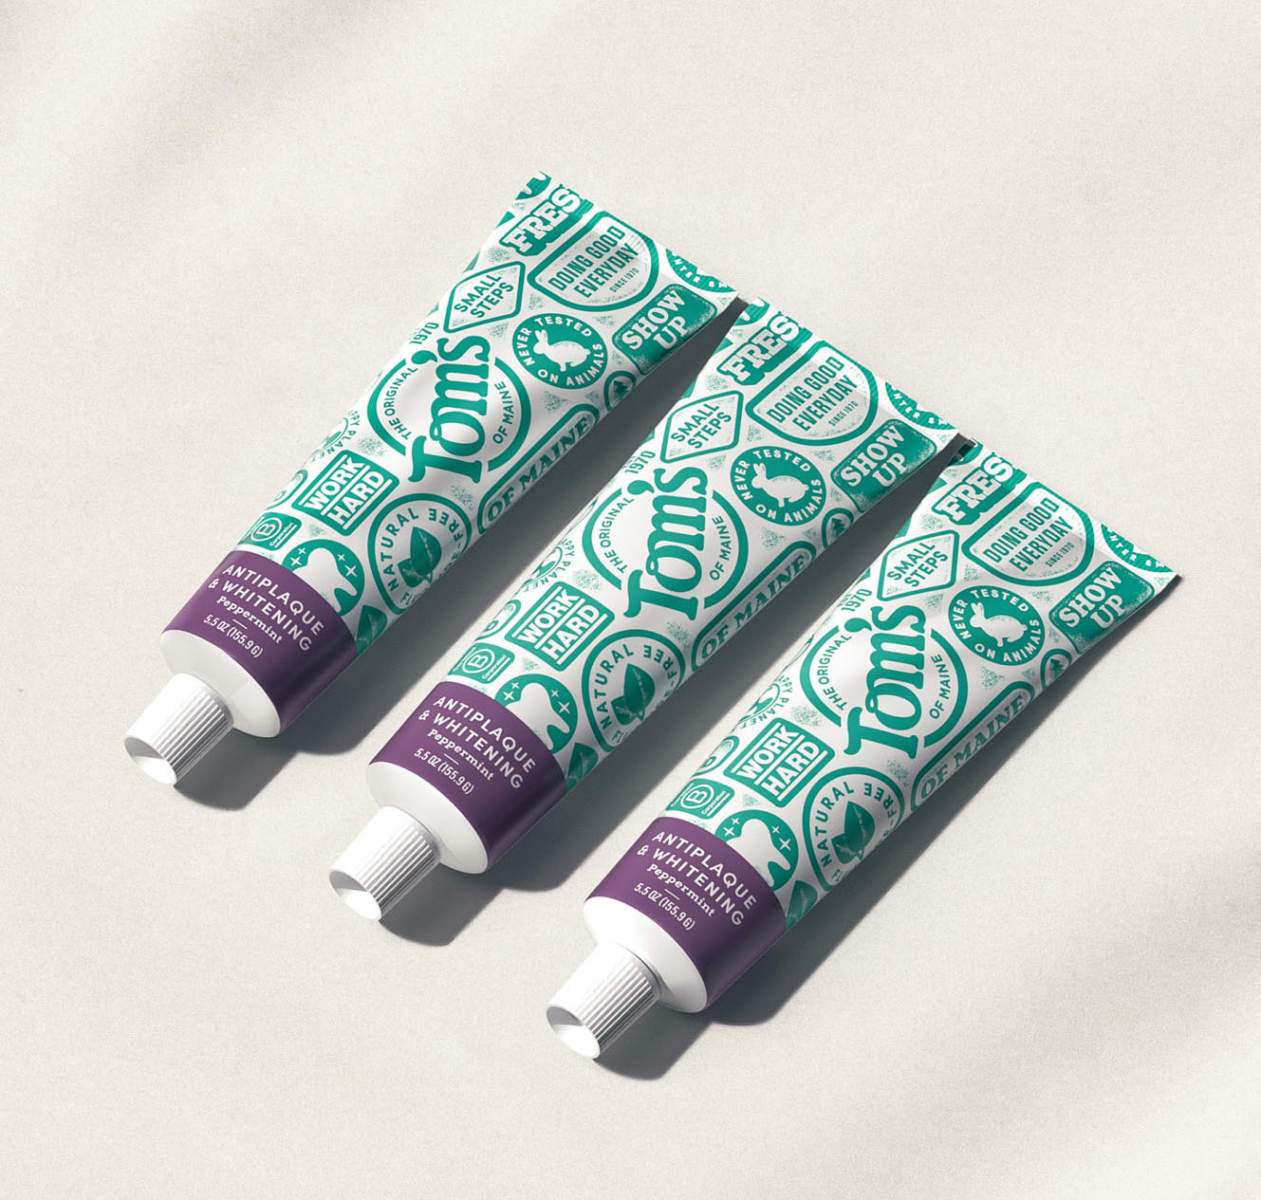 Tom's of Maine Toothpaste Packaging Design